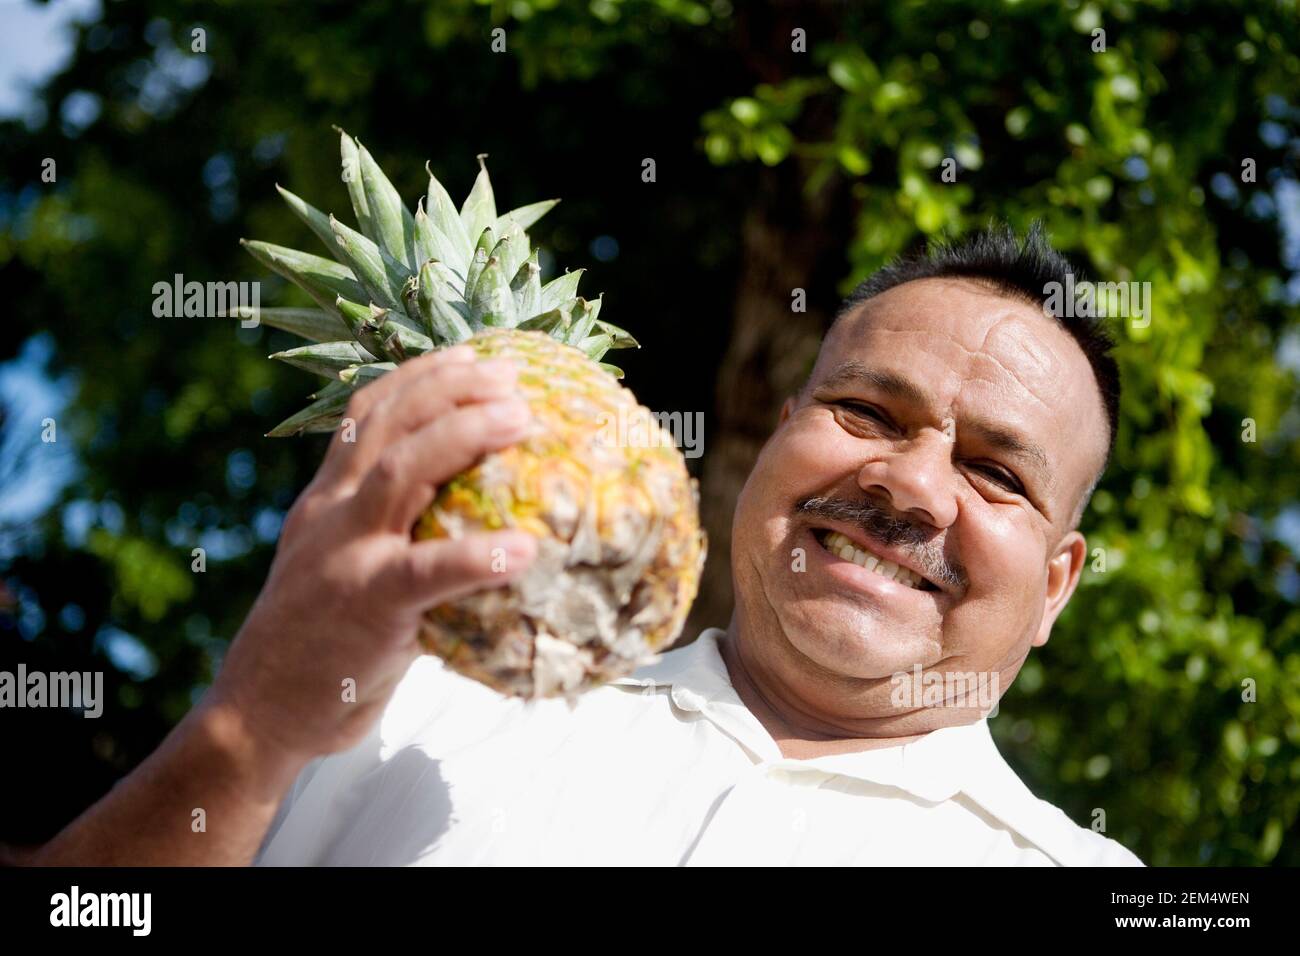 Portrait of a mature man holding a pineapple and looking cheerful Stock Photo